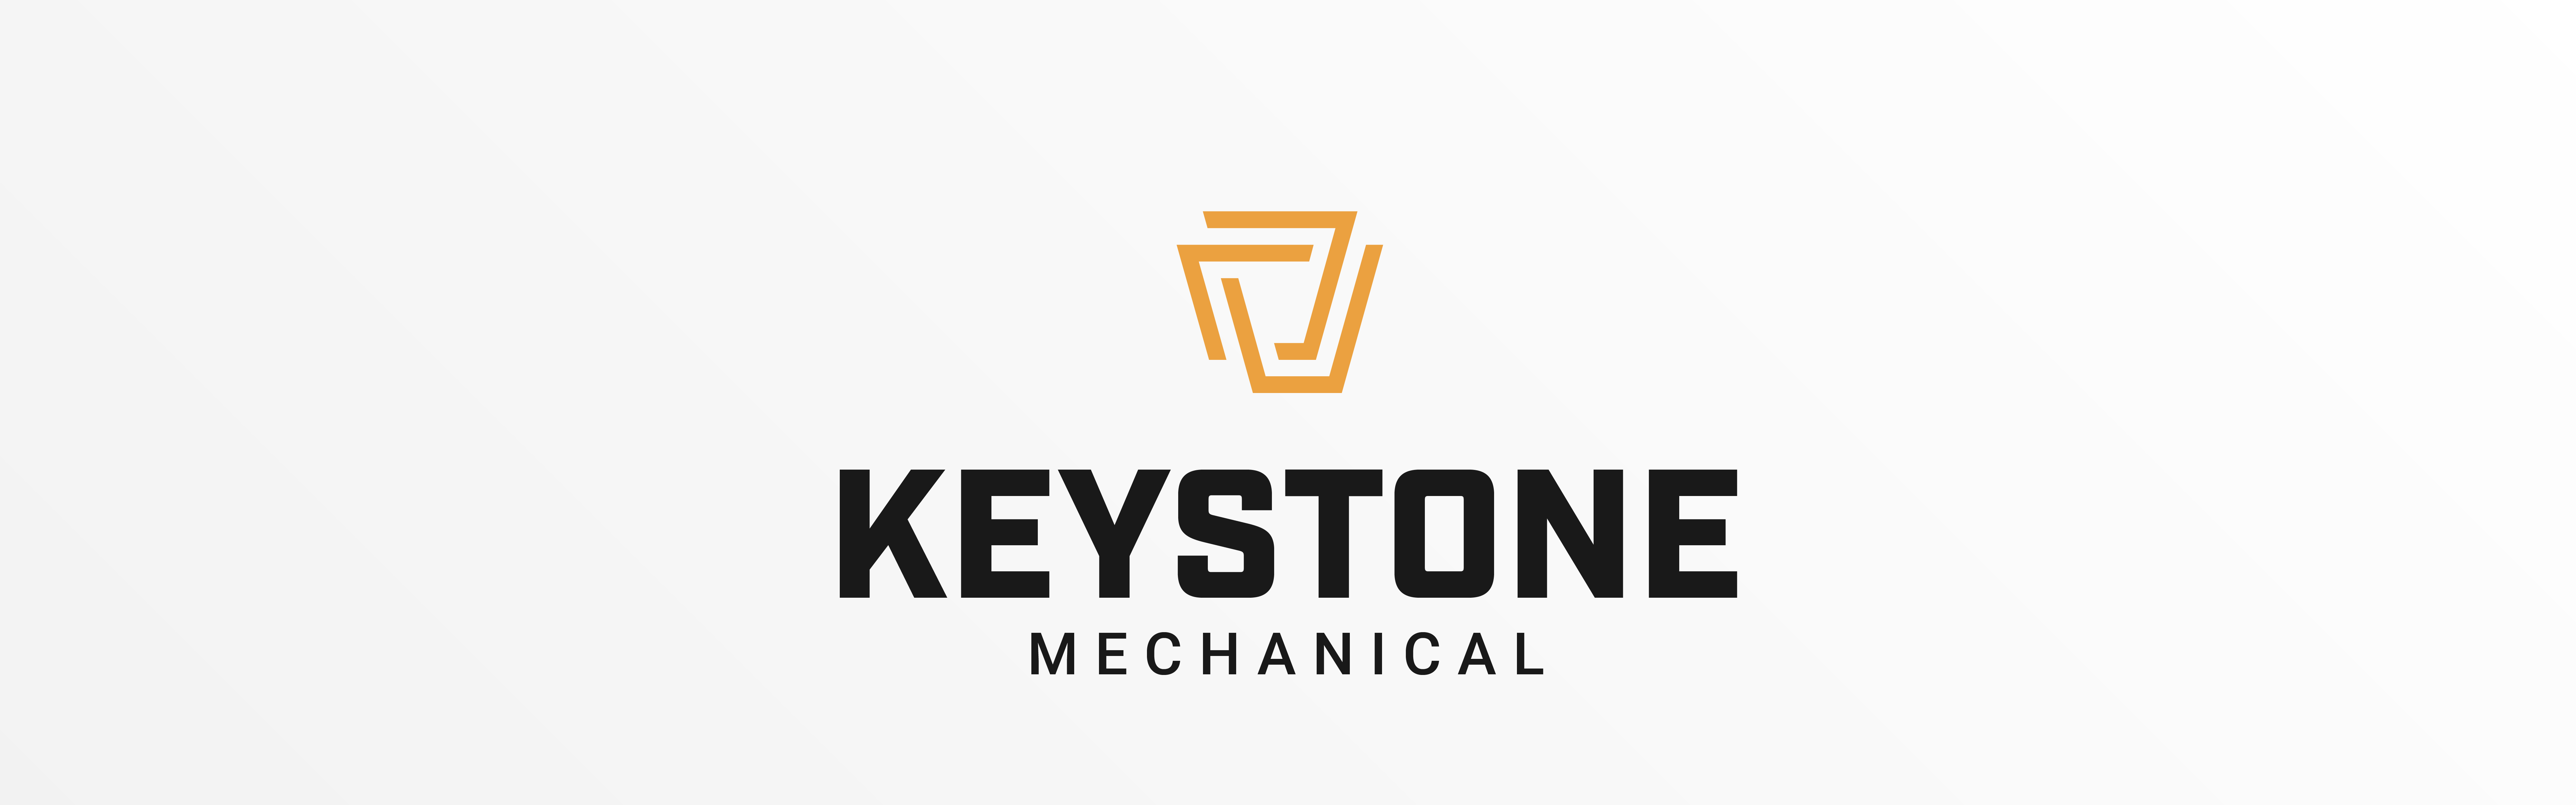 Logo of Keystone Mechanical featuring a stylized letter "k" with mechanical elements in a simple, modern font on a white background.